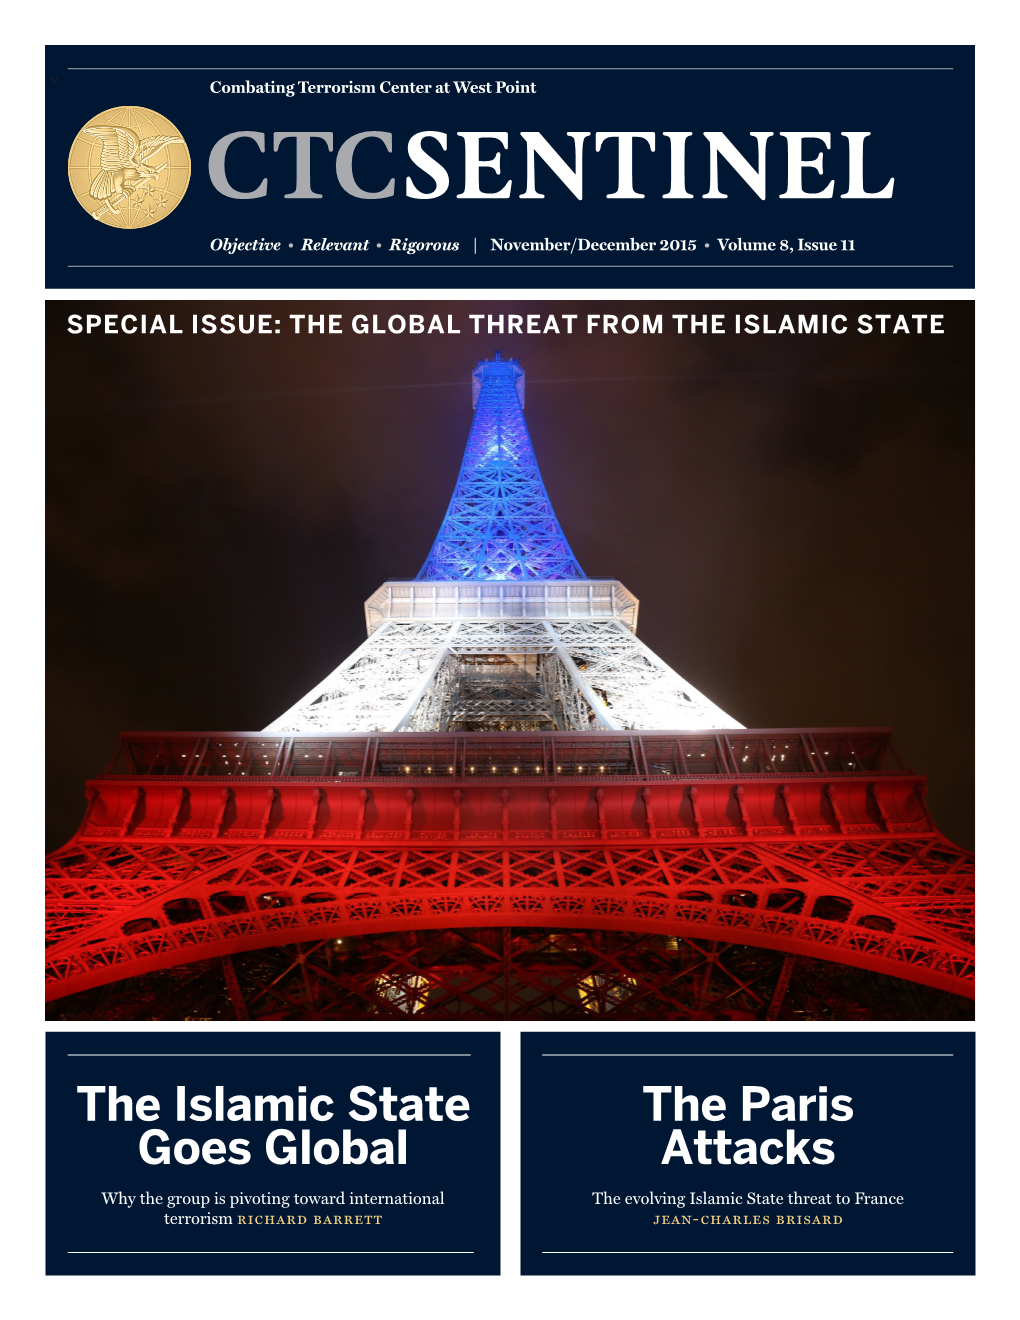 The Paris Attacks the Islamic State Goes Global